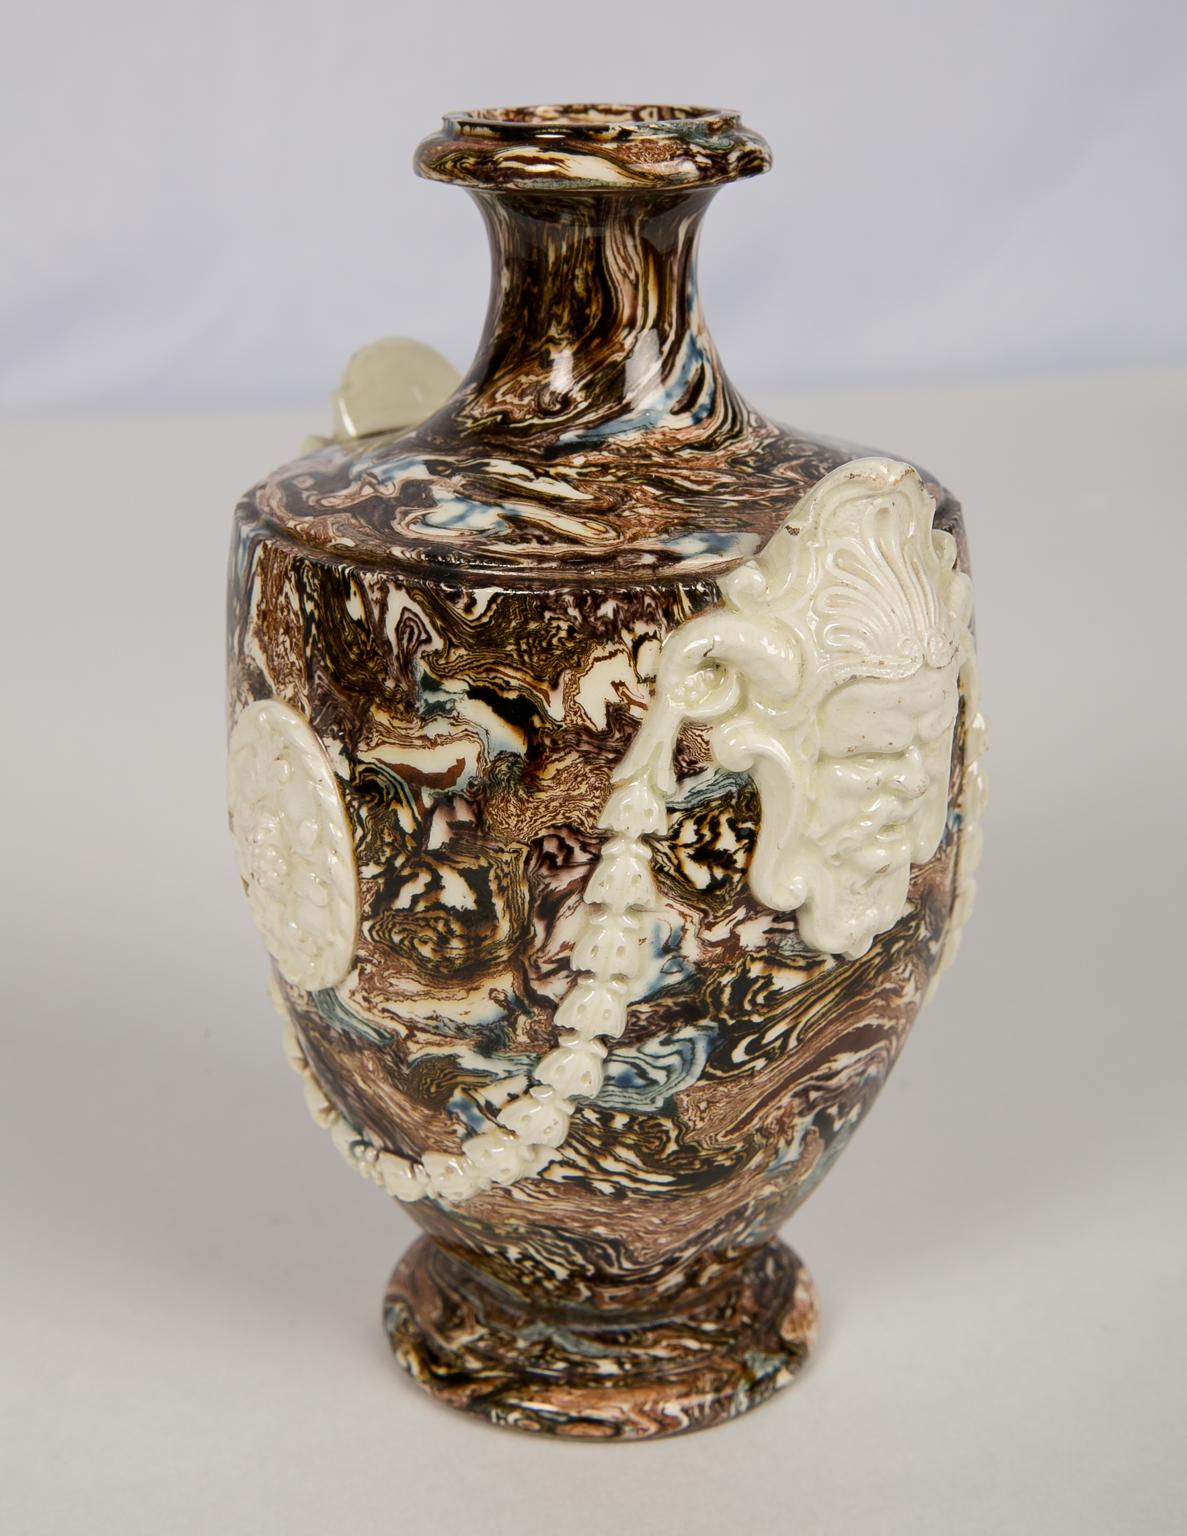 Solid Agateware Vase 18th Century Made by Neale & Co. 2